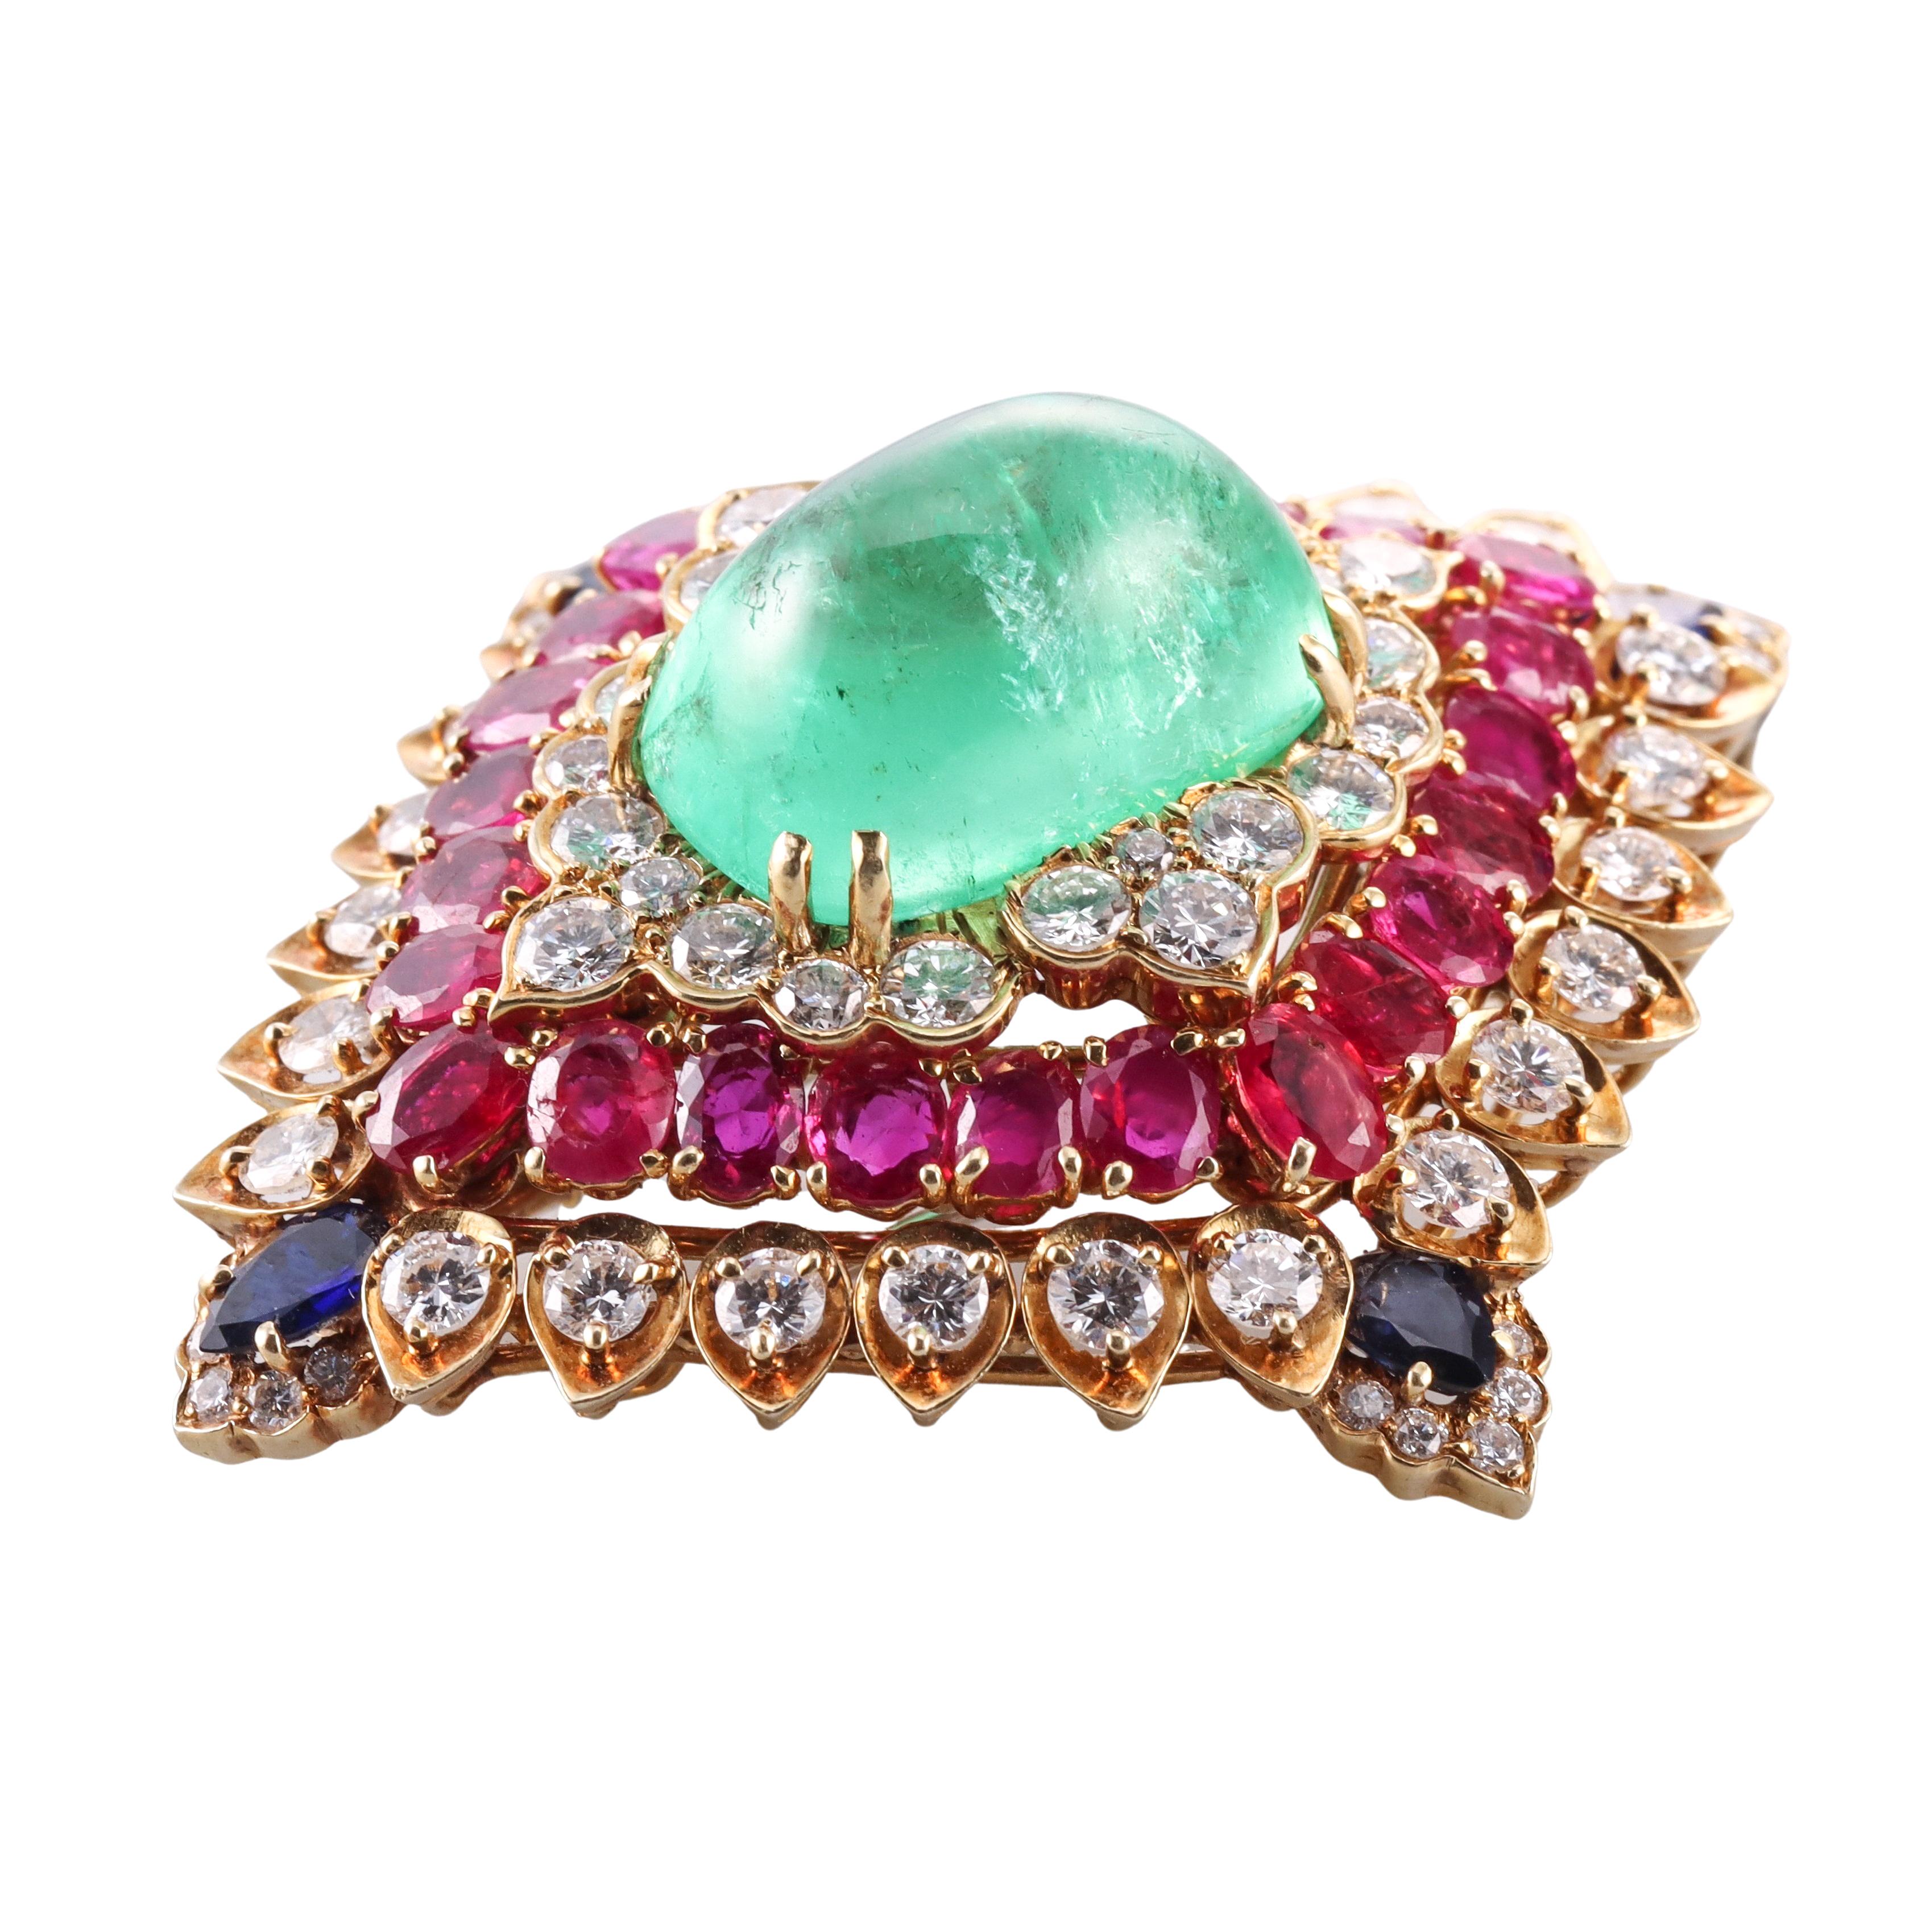 A remarkable 18k gold  brooch by David Webb, featuring center emerald cabochon (stone measures approx. 21.03 x 14 x11.5mm) weighing about 26 carats, surrounded with blue sapphires, rubies and approx. 6 carats in SI1/H diamonds. Few rubies have